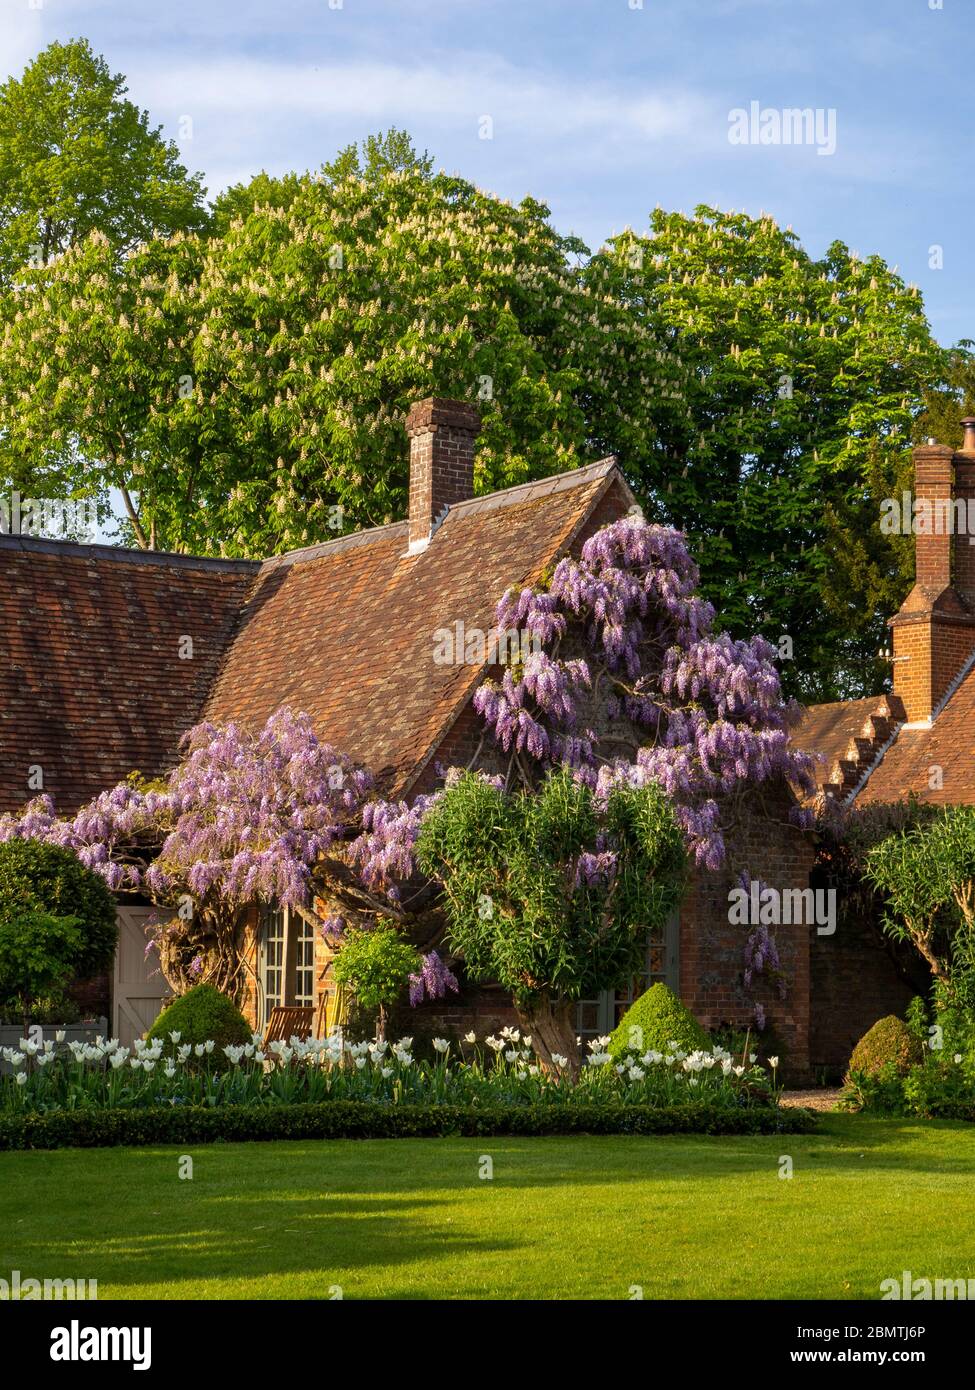 Wisteria sinensis on the Garden room at Chenies Manor in April.Beautiful pastel purple flowers on a climber trained up old brickwok. Stock Photo